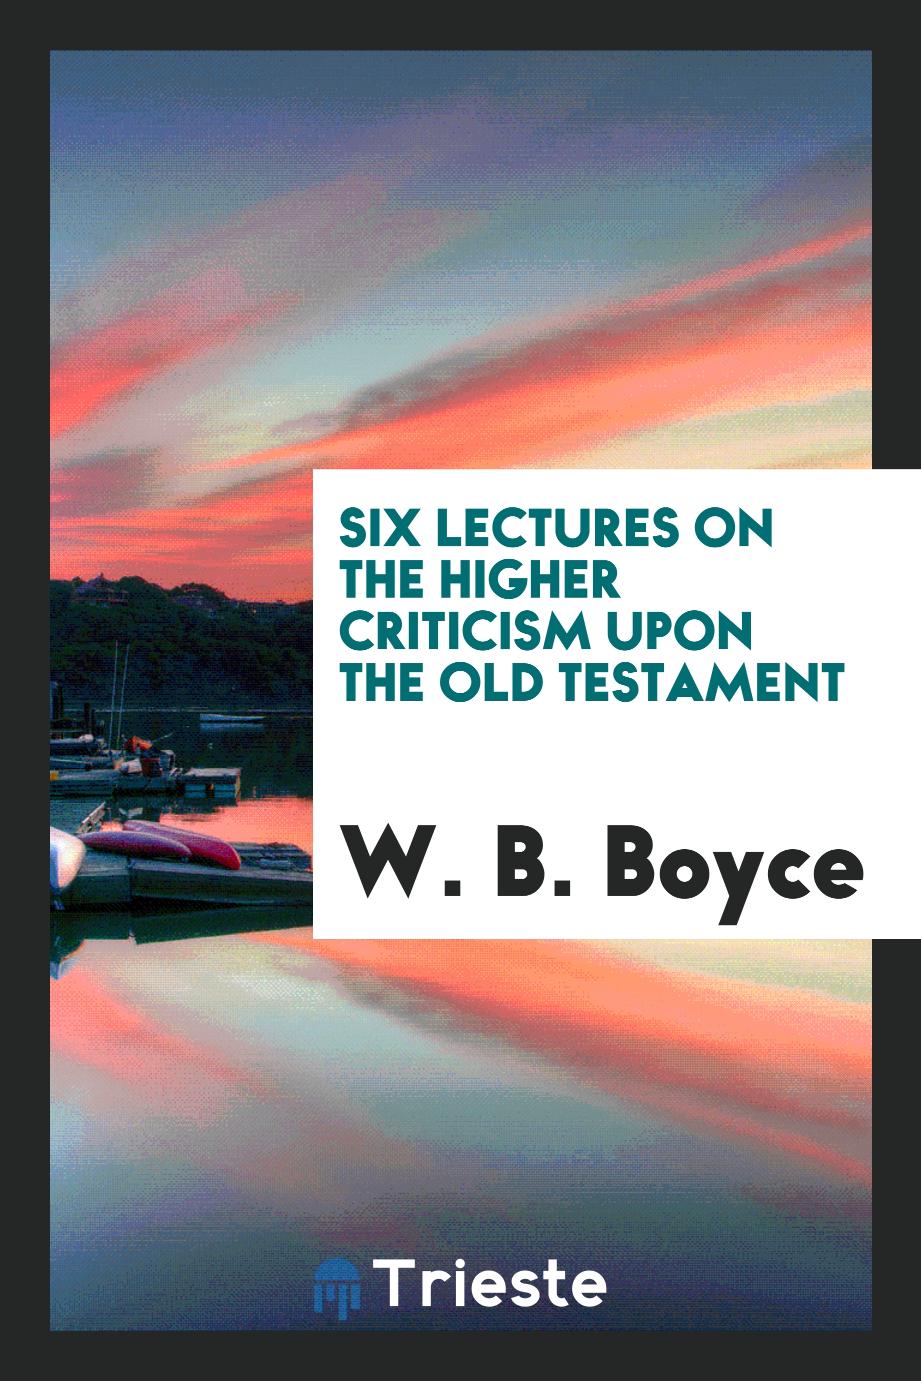 Six Lectures on the Higher Criticism upon the Old Testament